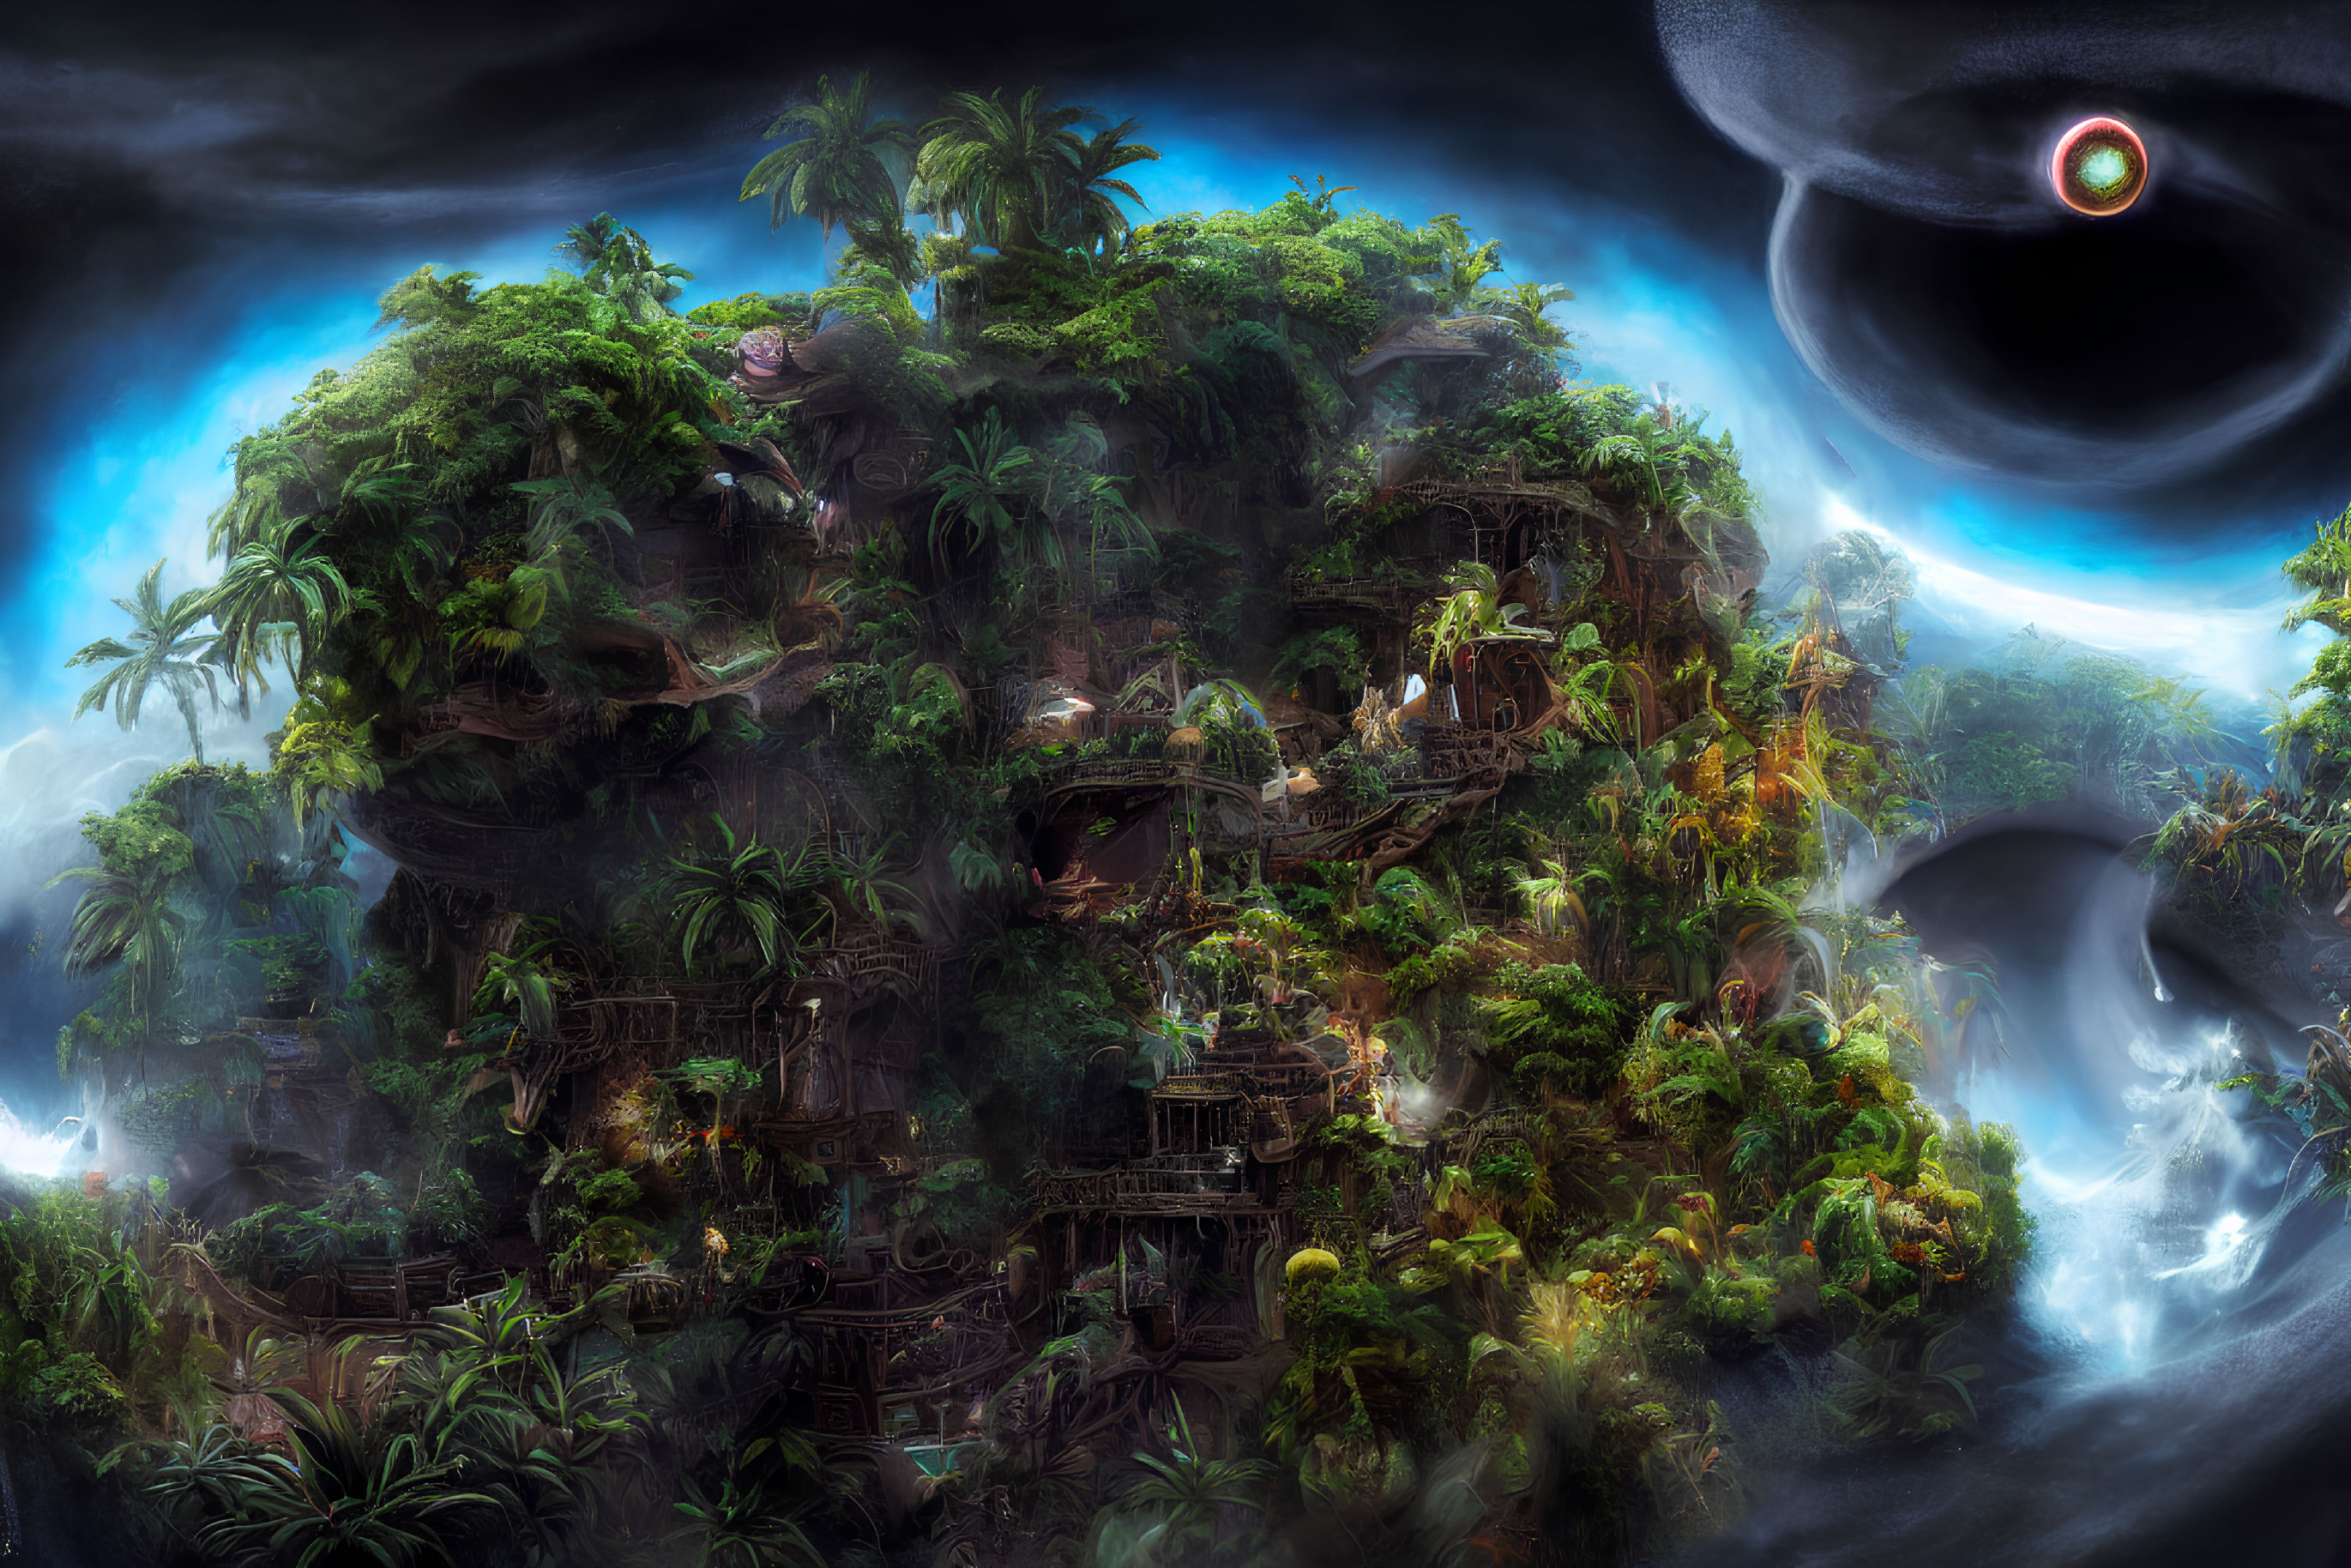 Fantastical jungle landscape with lush foliage, waterfalls, ancient ruins, and cosmic sky.